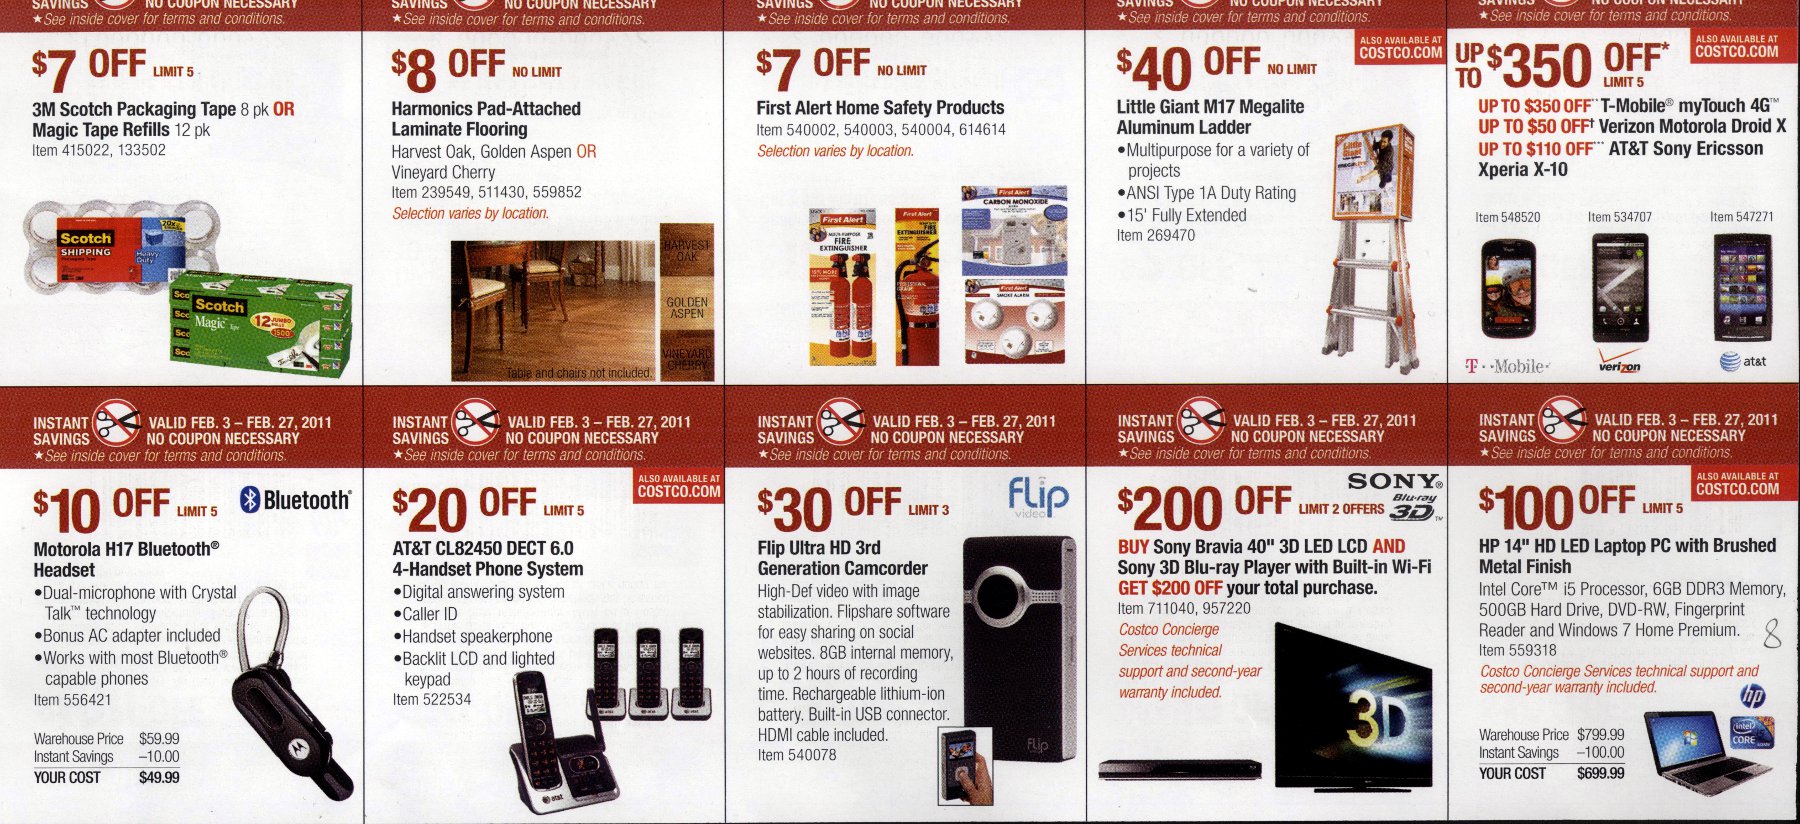 Coupon book full size page -> 8 <-